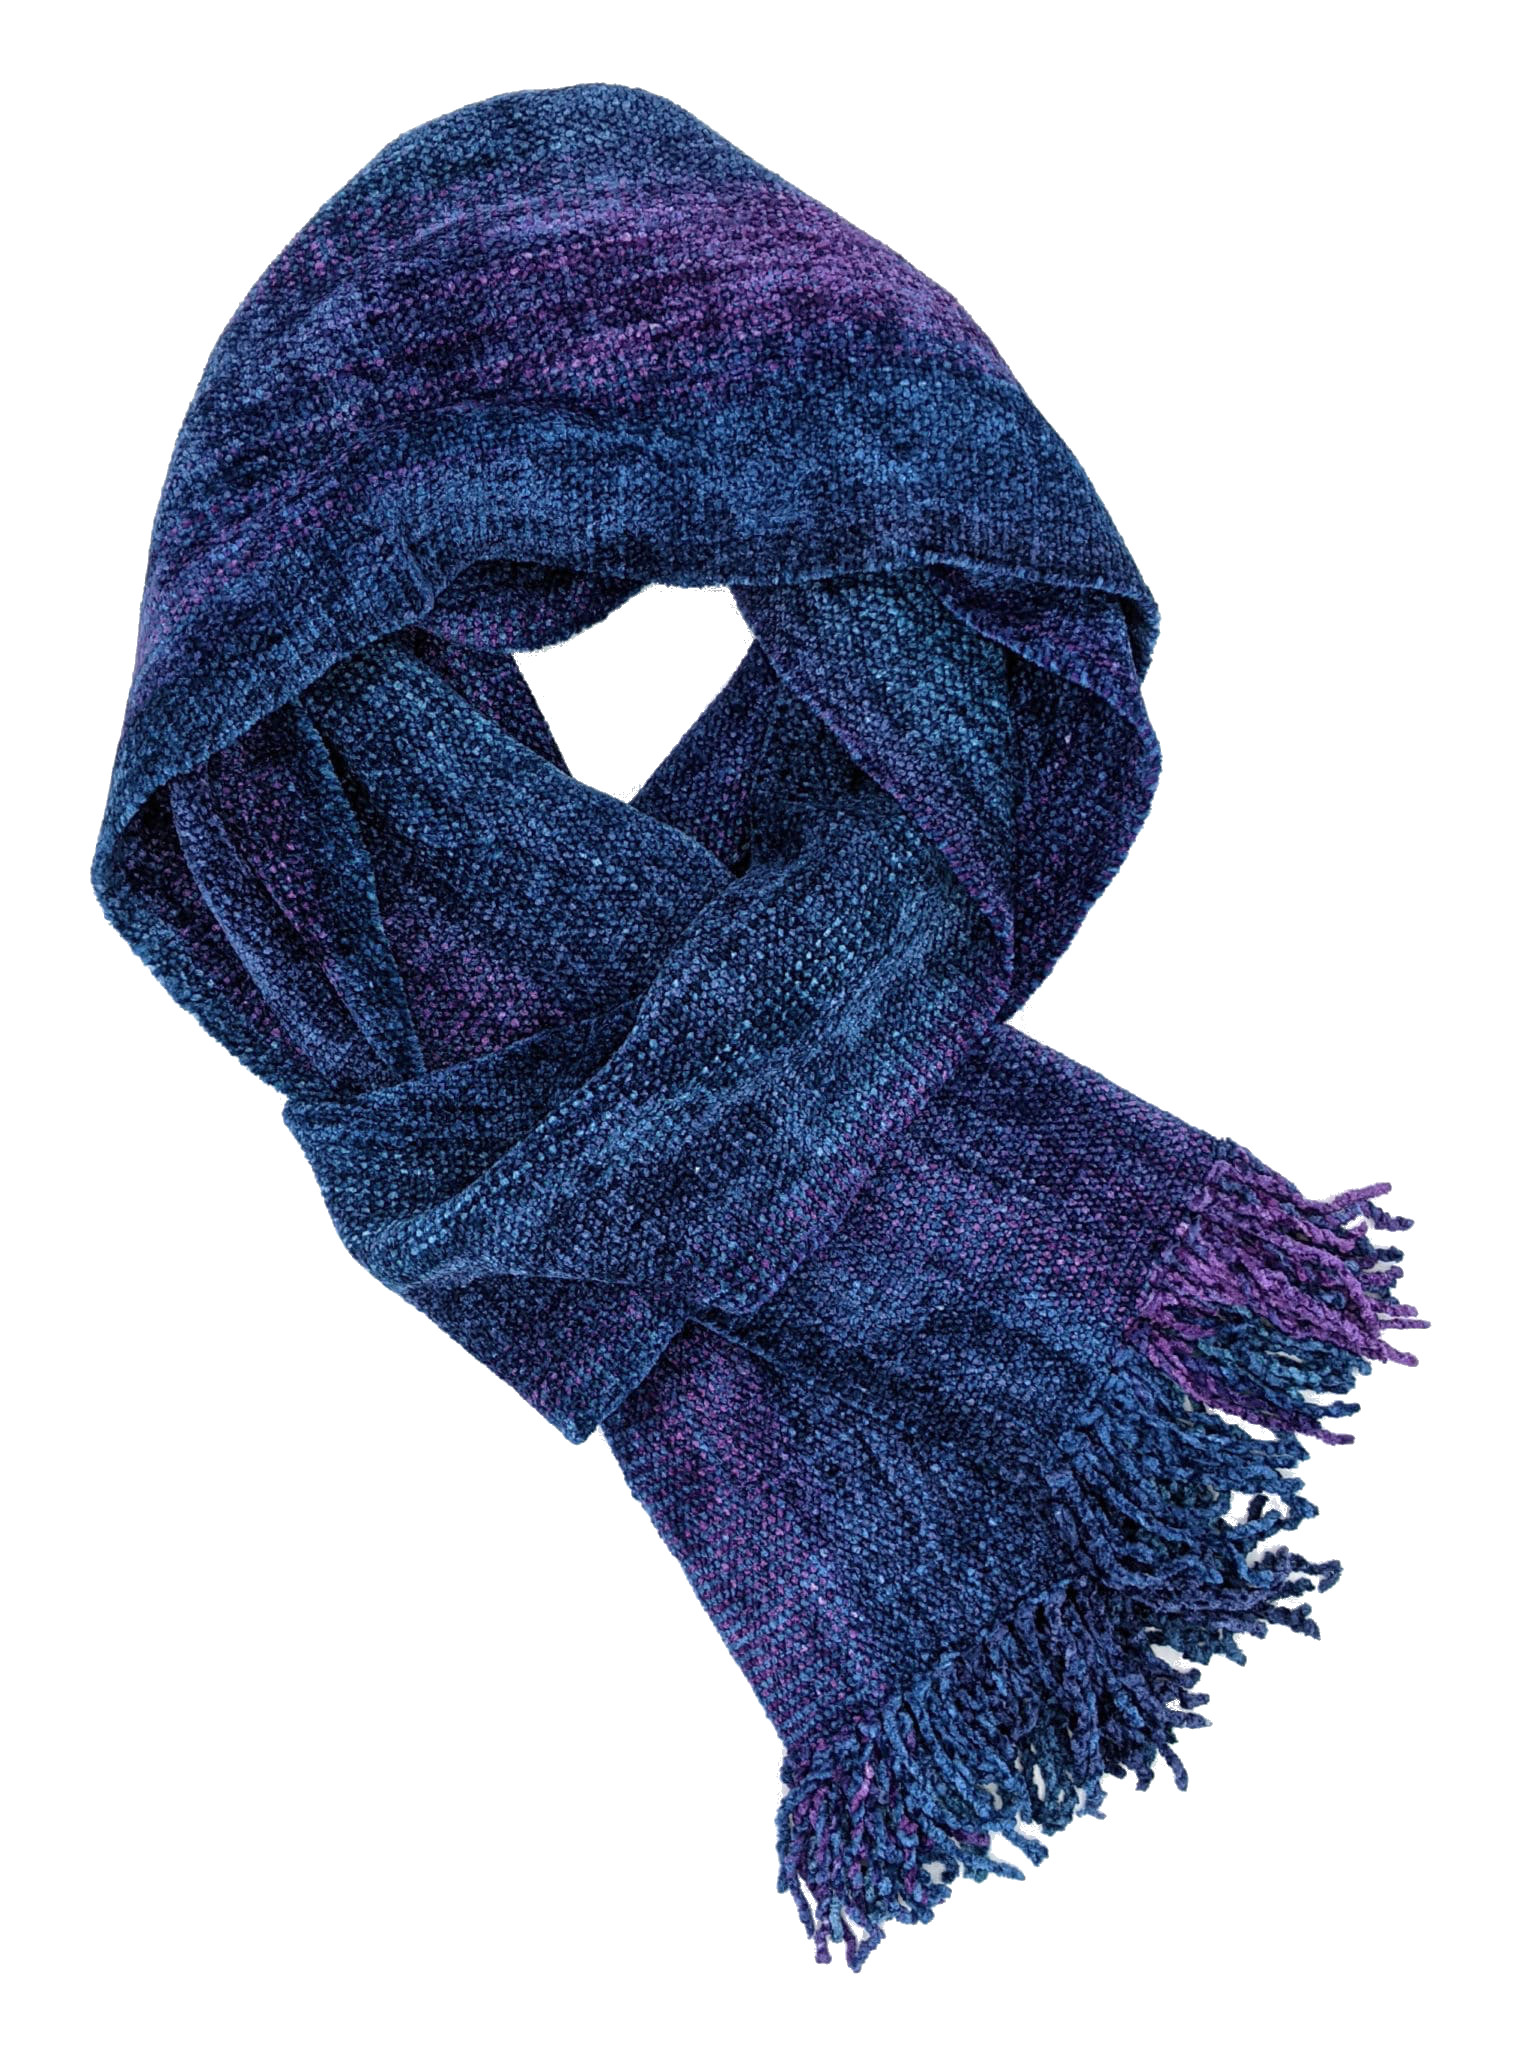 Blues, Purples - Bamboo Chenille Handwoven Scarf 8 x 68